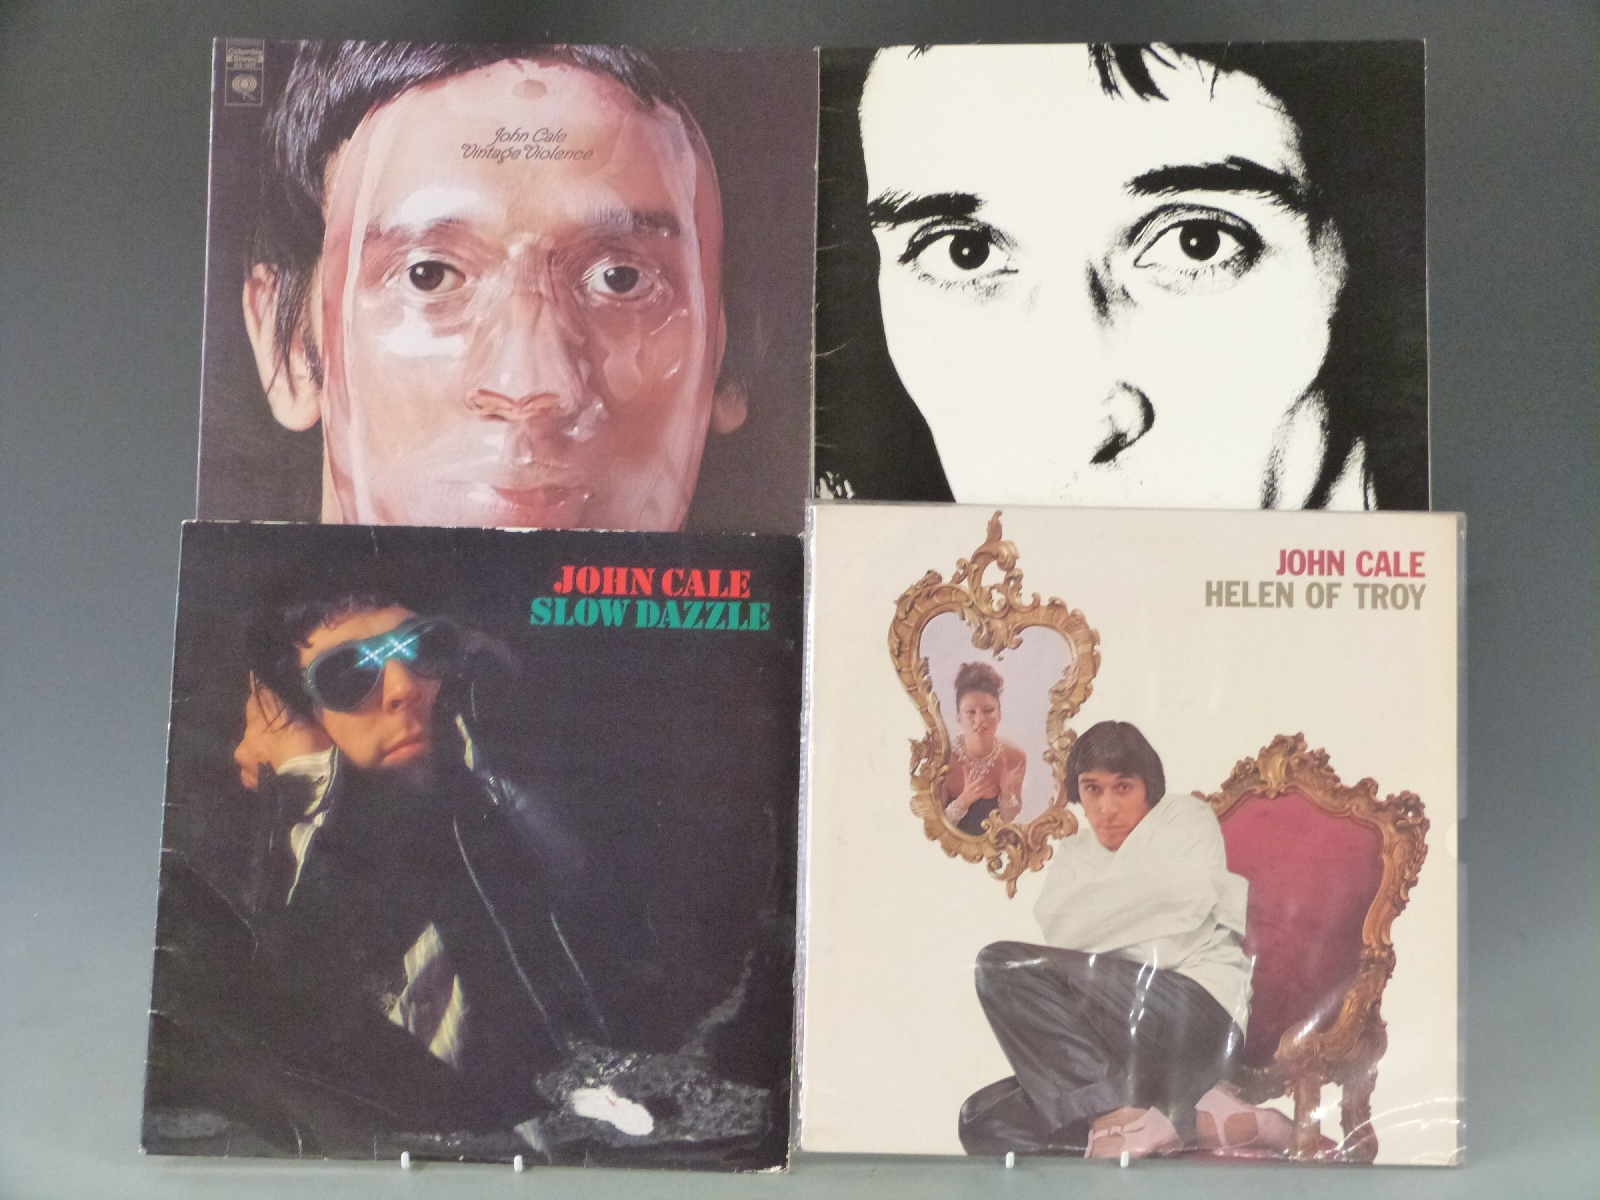 John Cale - eight albums including Vintage Violence, Fear, Slow Dazzle, Helen of Troy, New